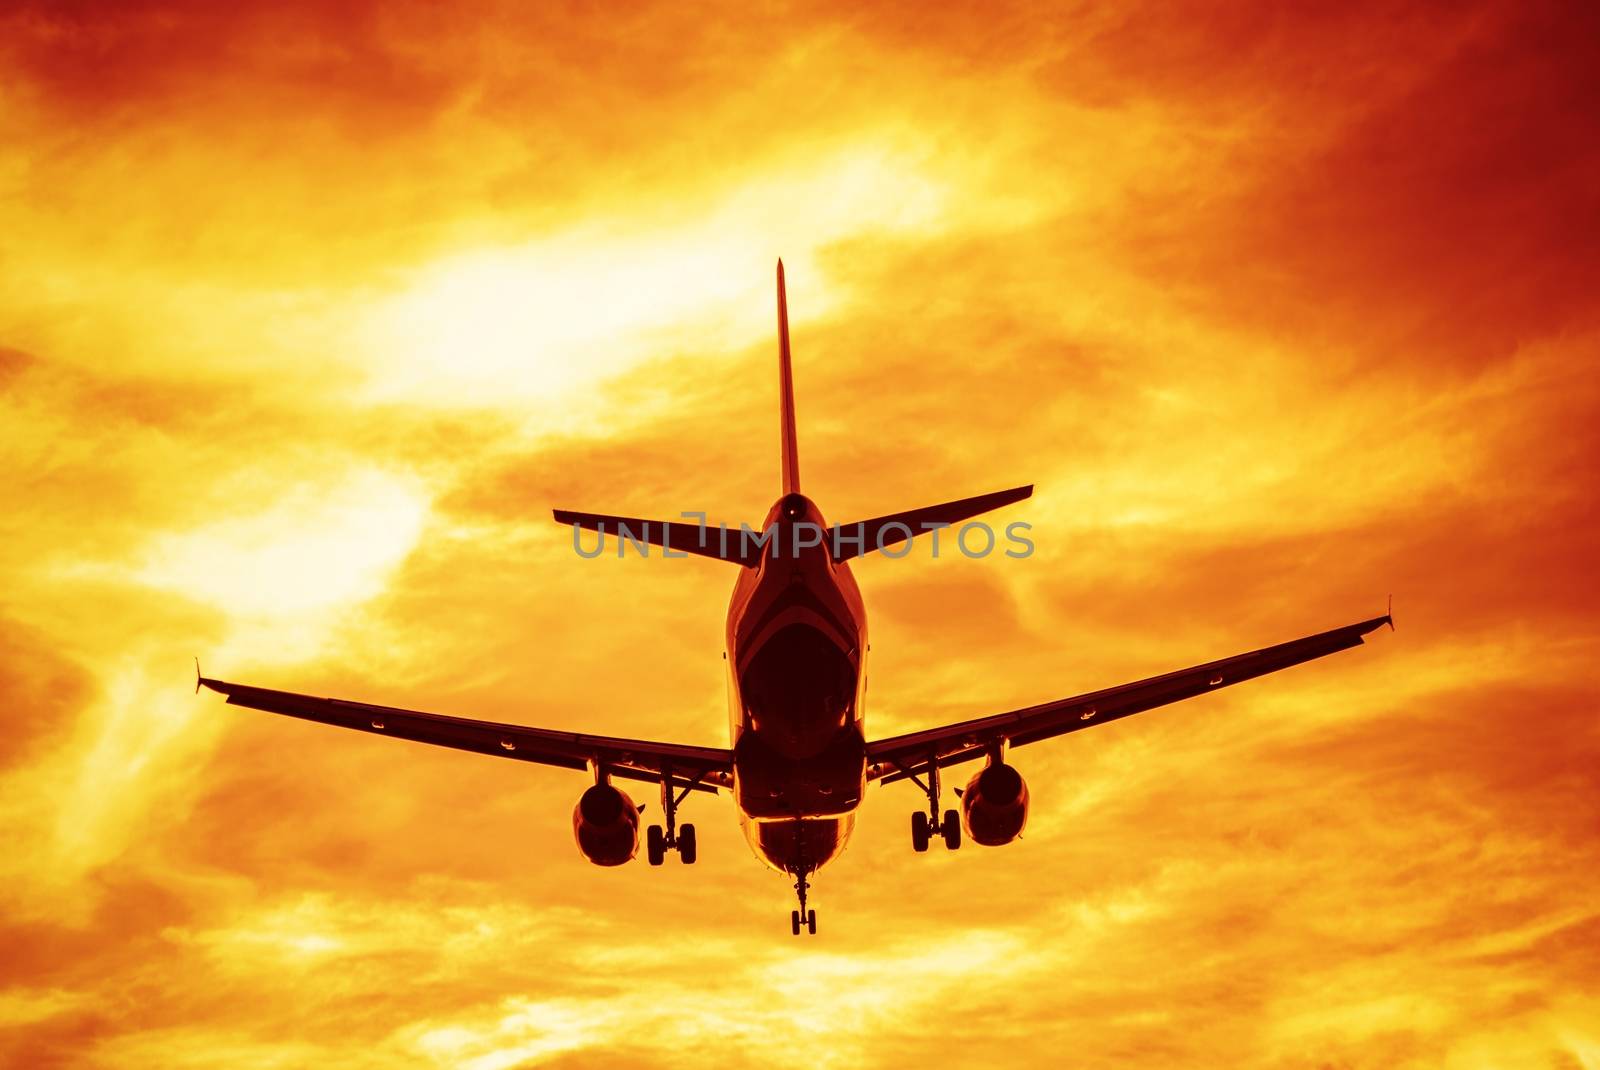 Business Flights Concept Photography. Commercial Airlines on the Sky During Sunset Take Off.